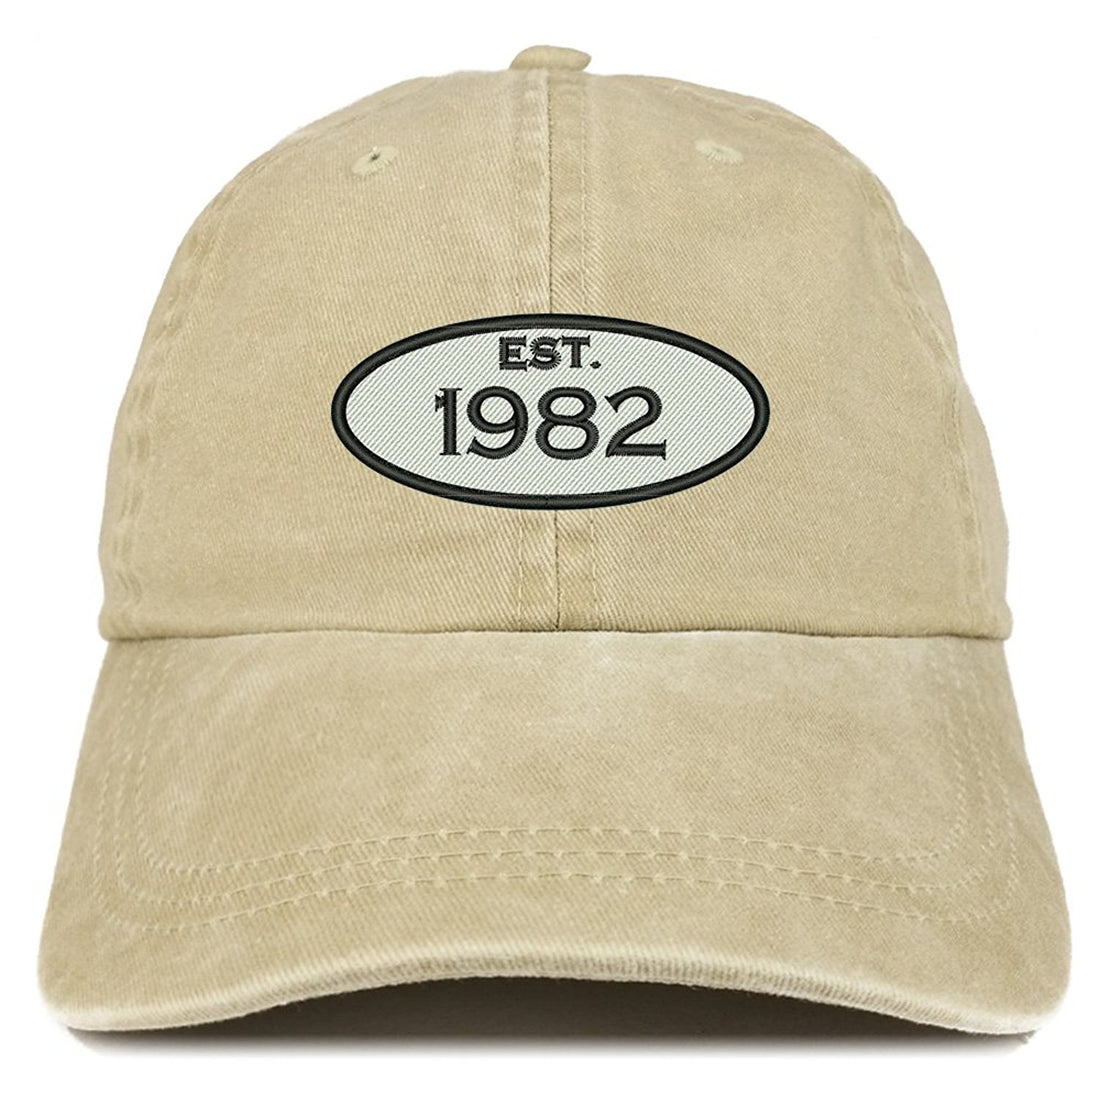 Trendy Apparel Shop Established 1982 Embroidered 37th Birthday Gift Pigment Dyed Washed Cotton Cap